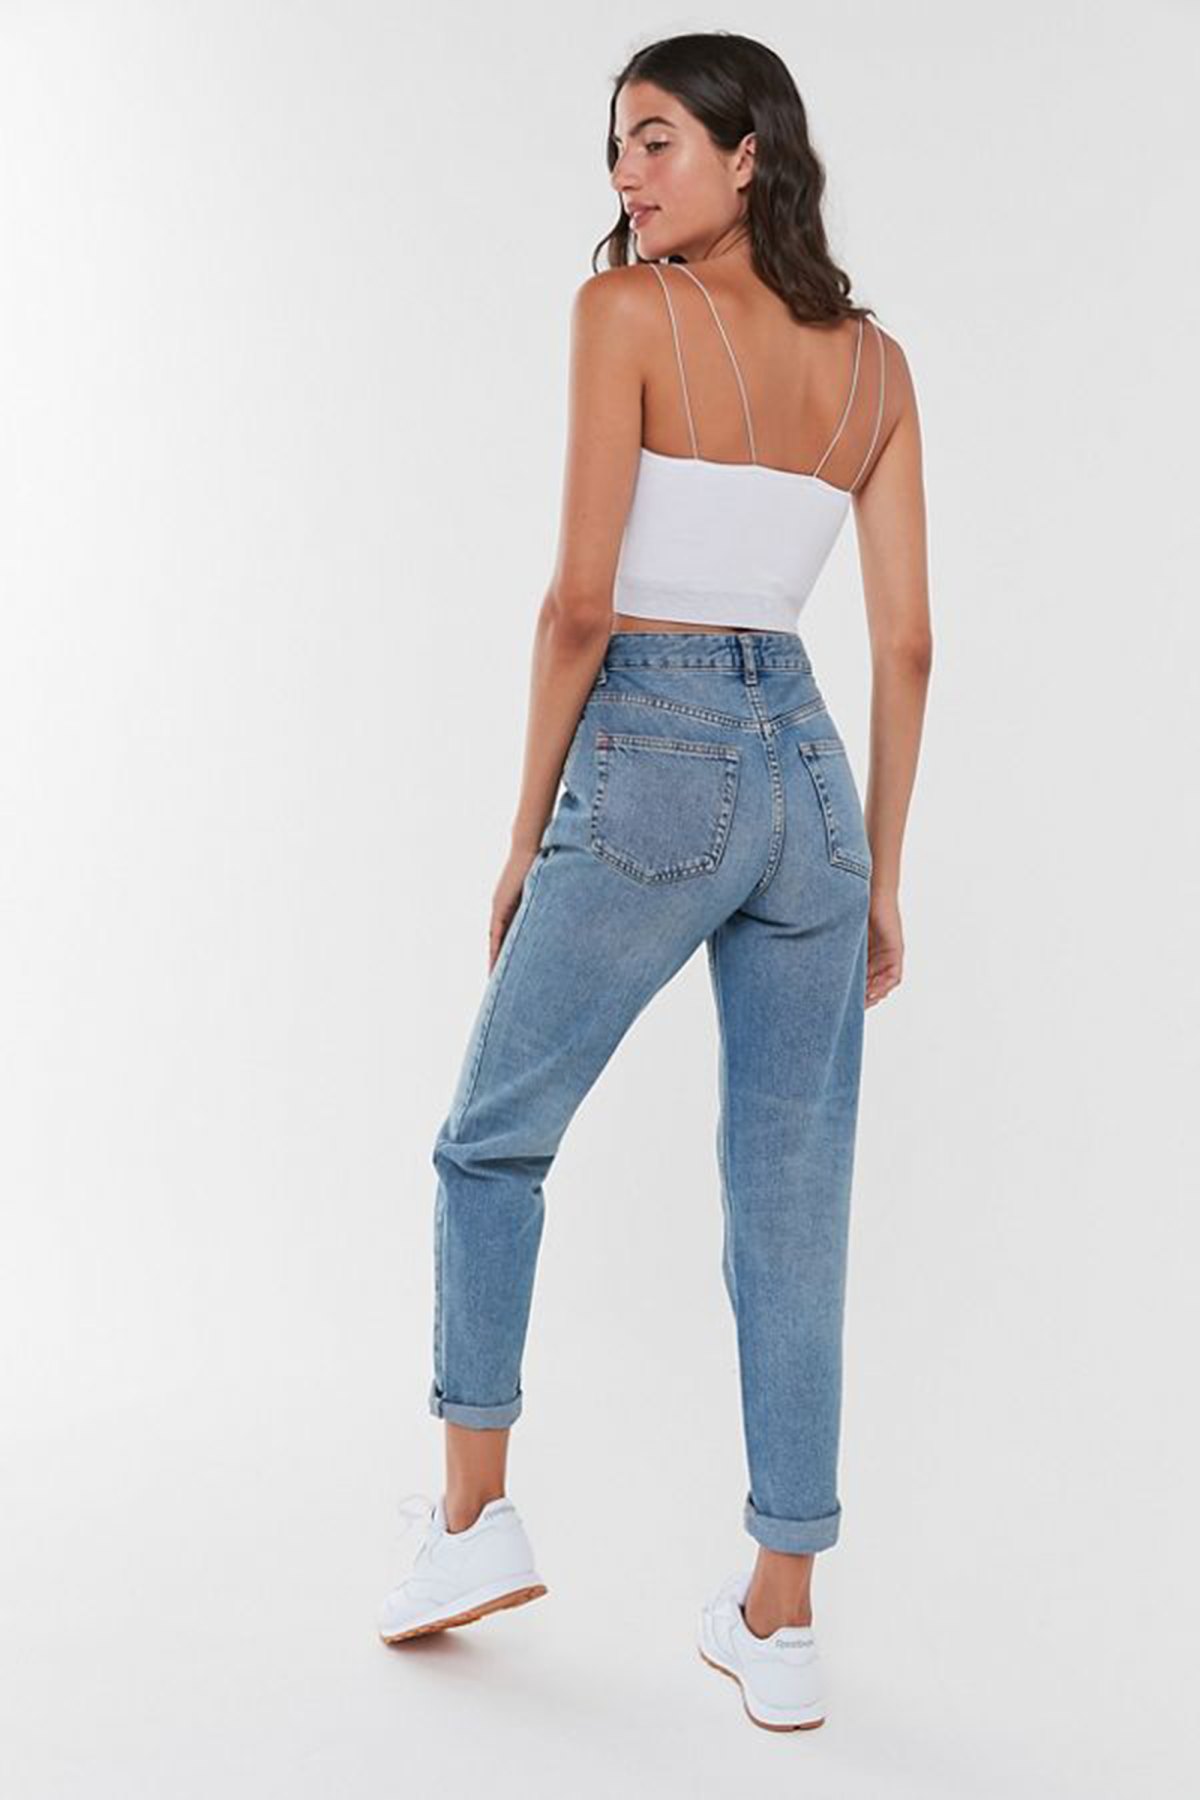 5 of Favorite BDG Jeans on Sale for at Outfitters